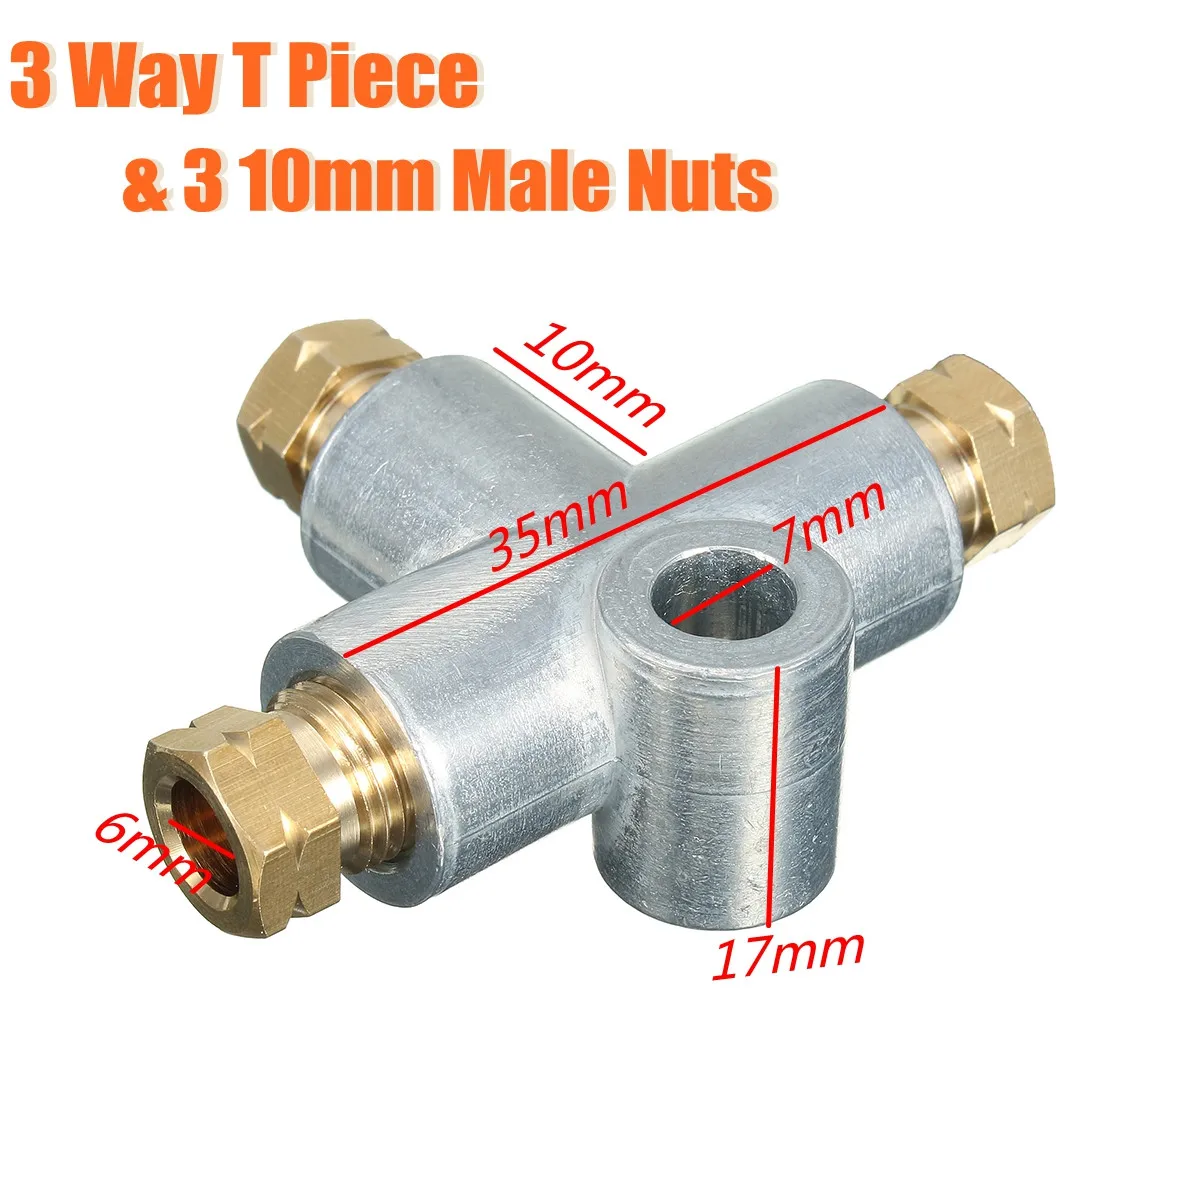 3 x M10 Male Nuts Short Metric Copper Pipe 10mm 3 Way T Piece Brake Tee 